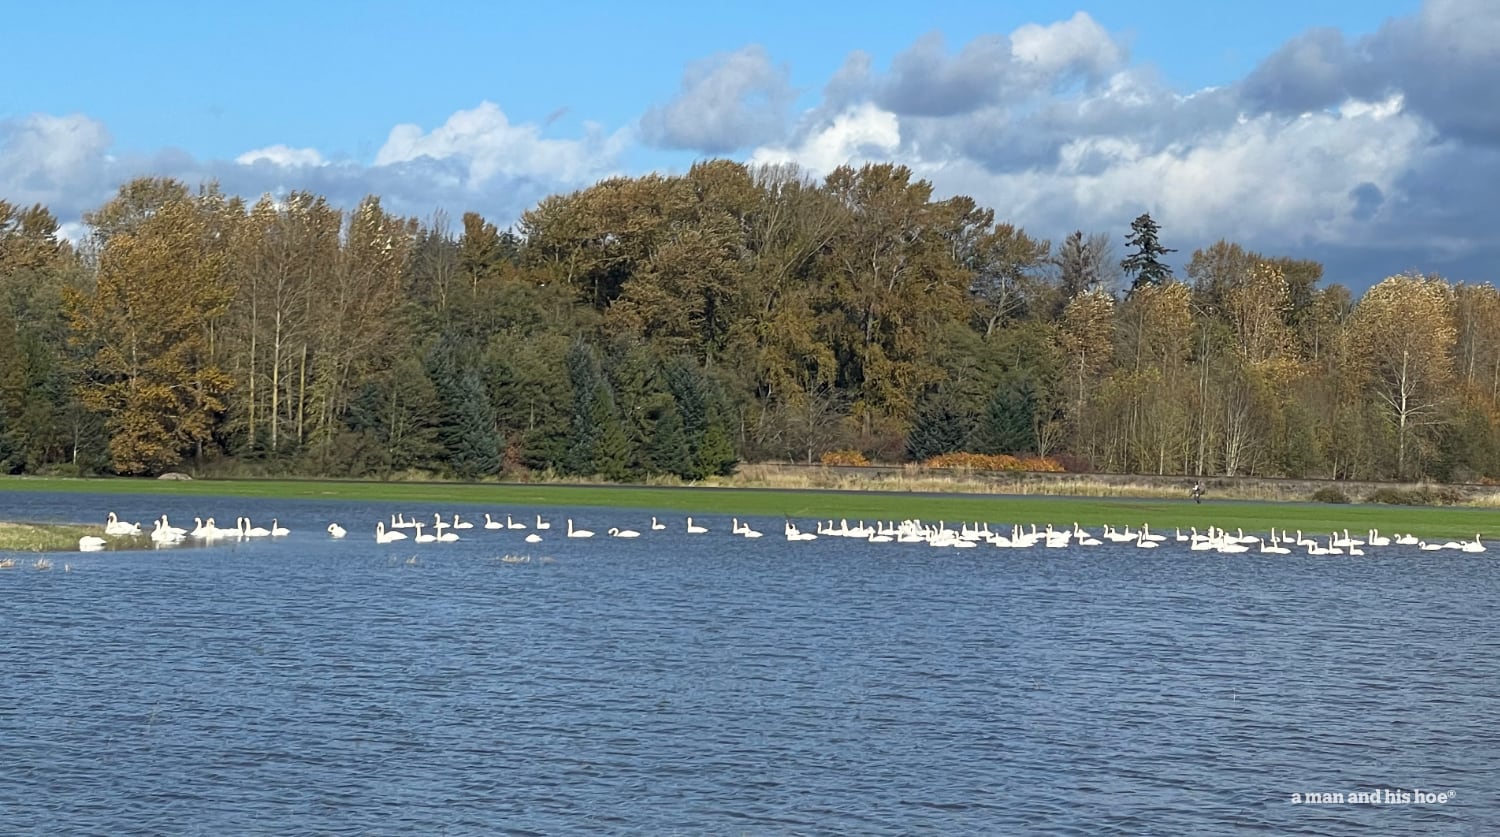 Swans swimming on a lake.